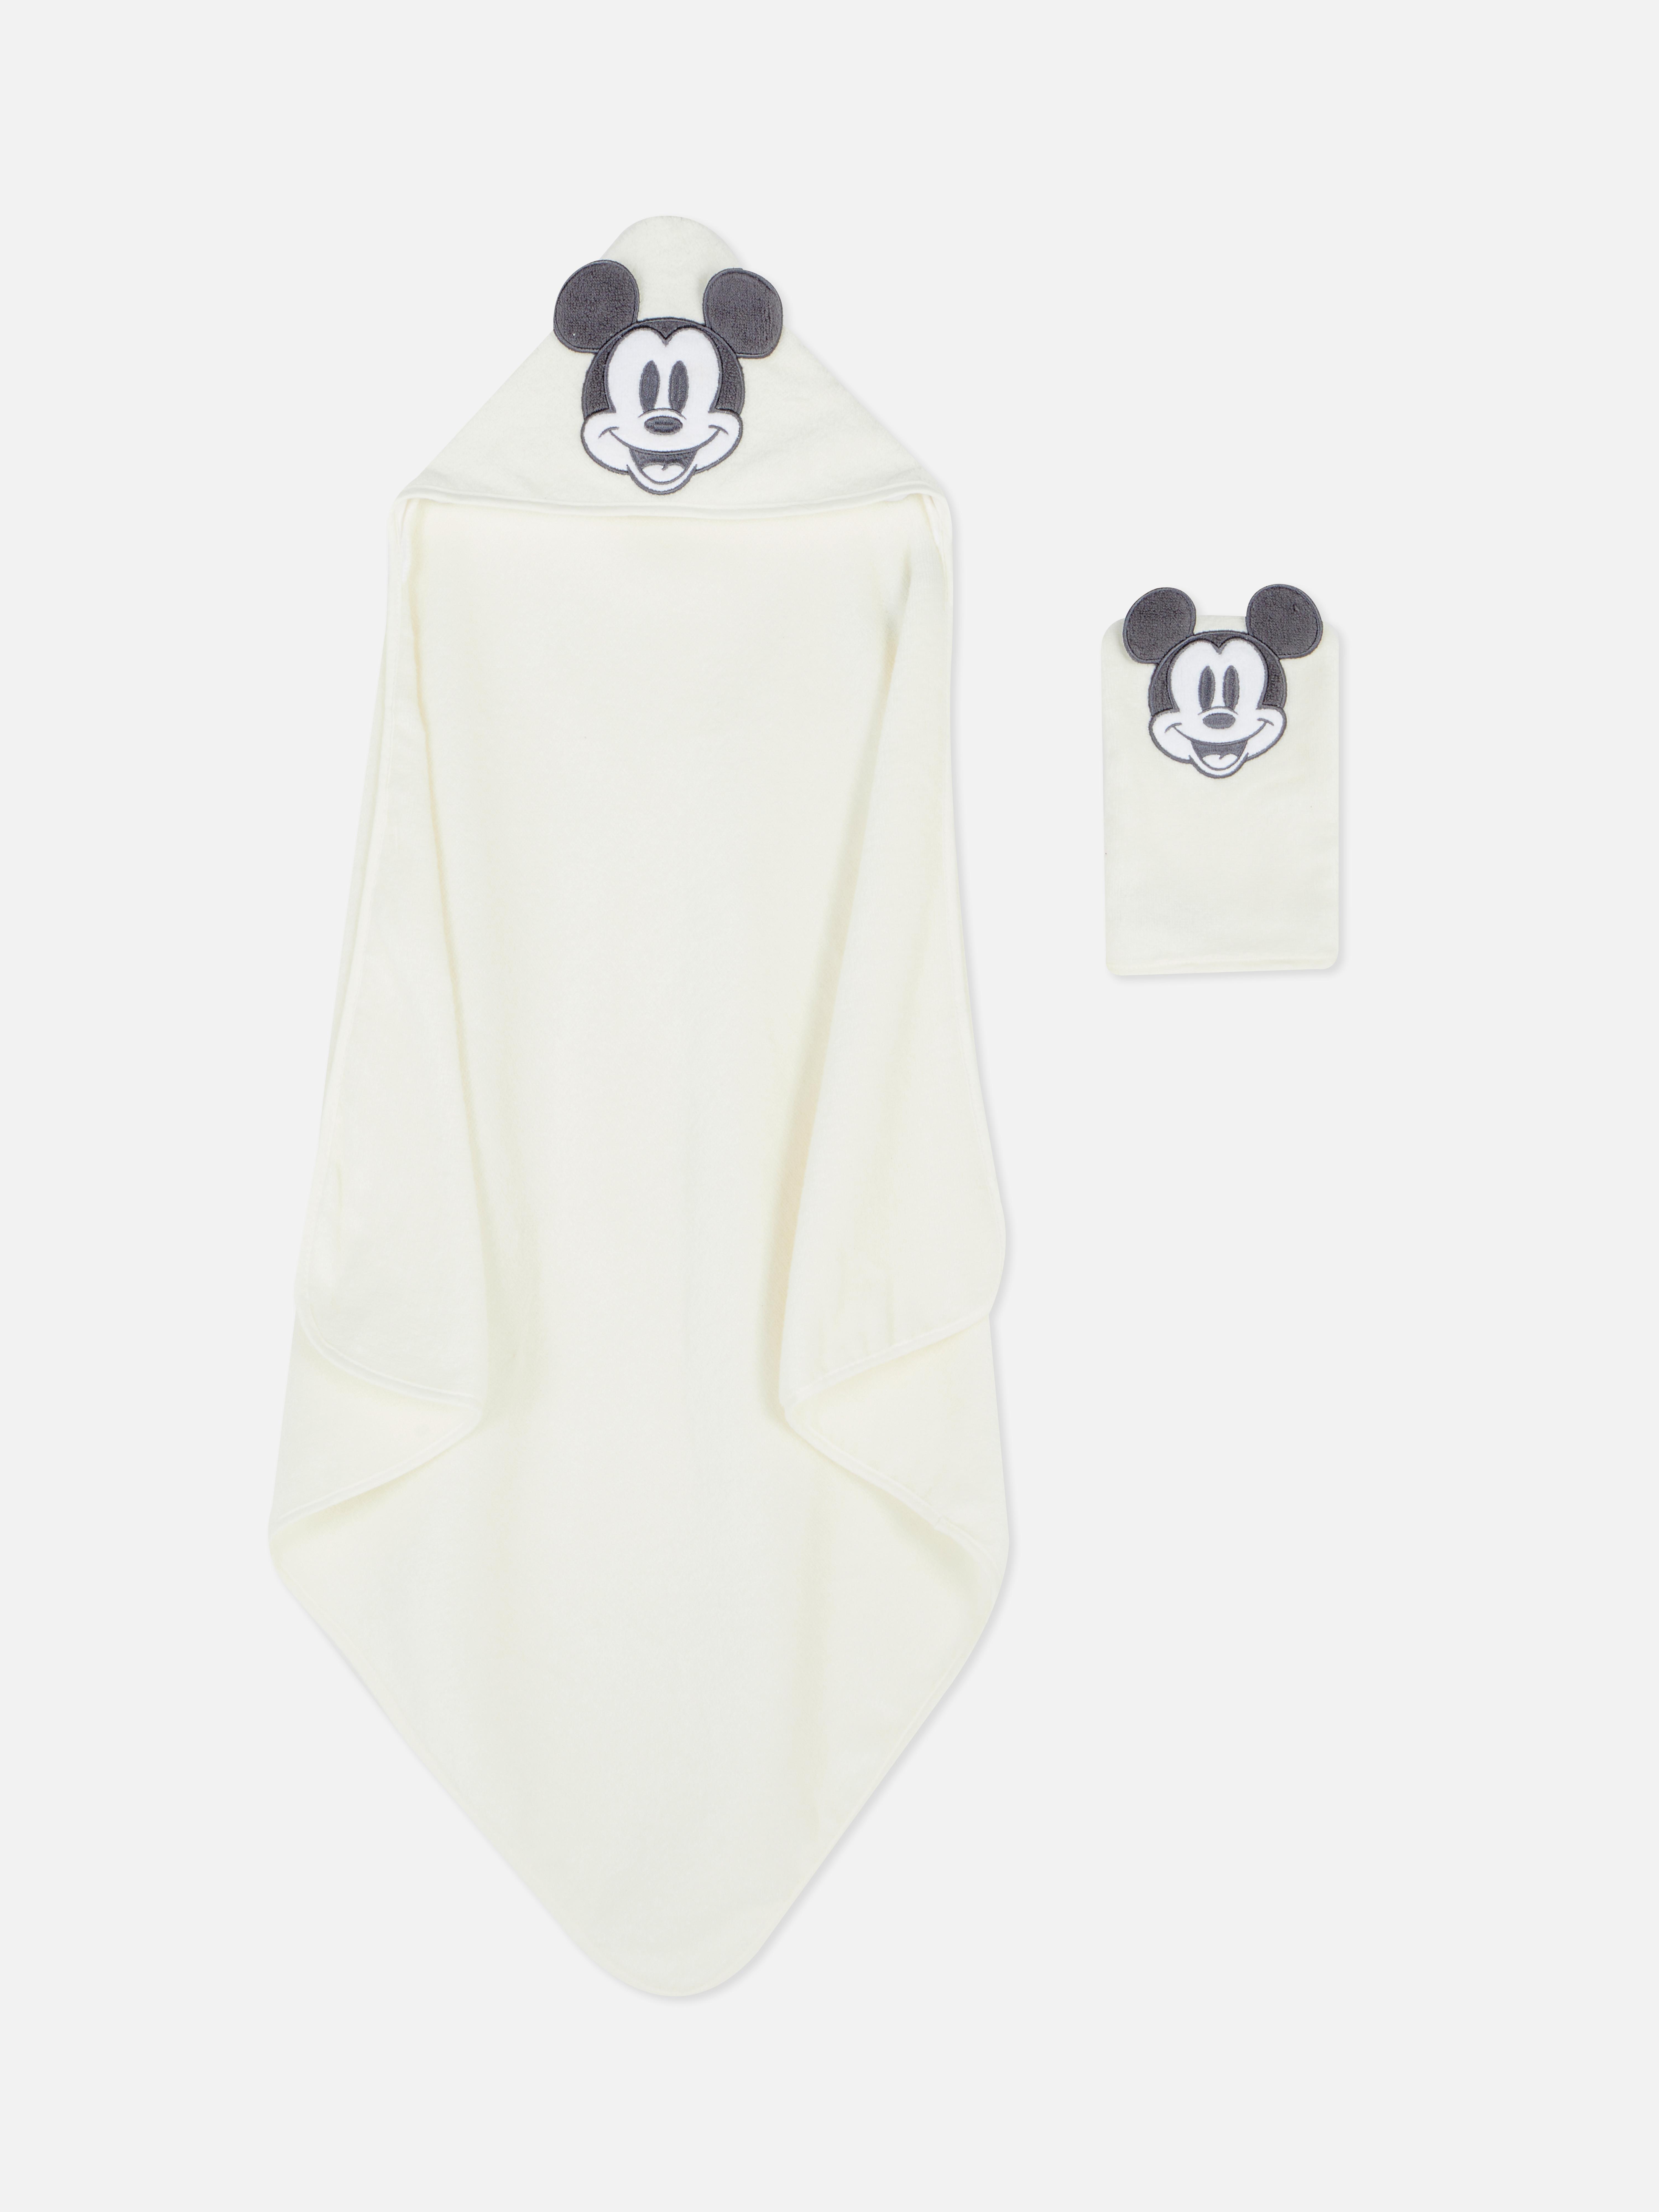 Disney's Mickey Mouse Hooded Towel and Washcloth Ecru